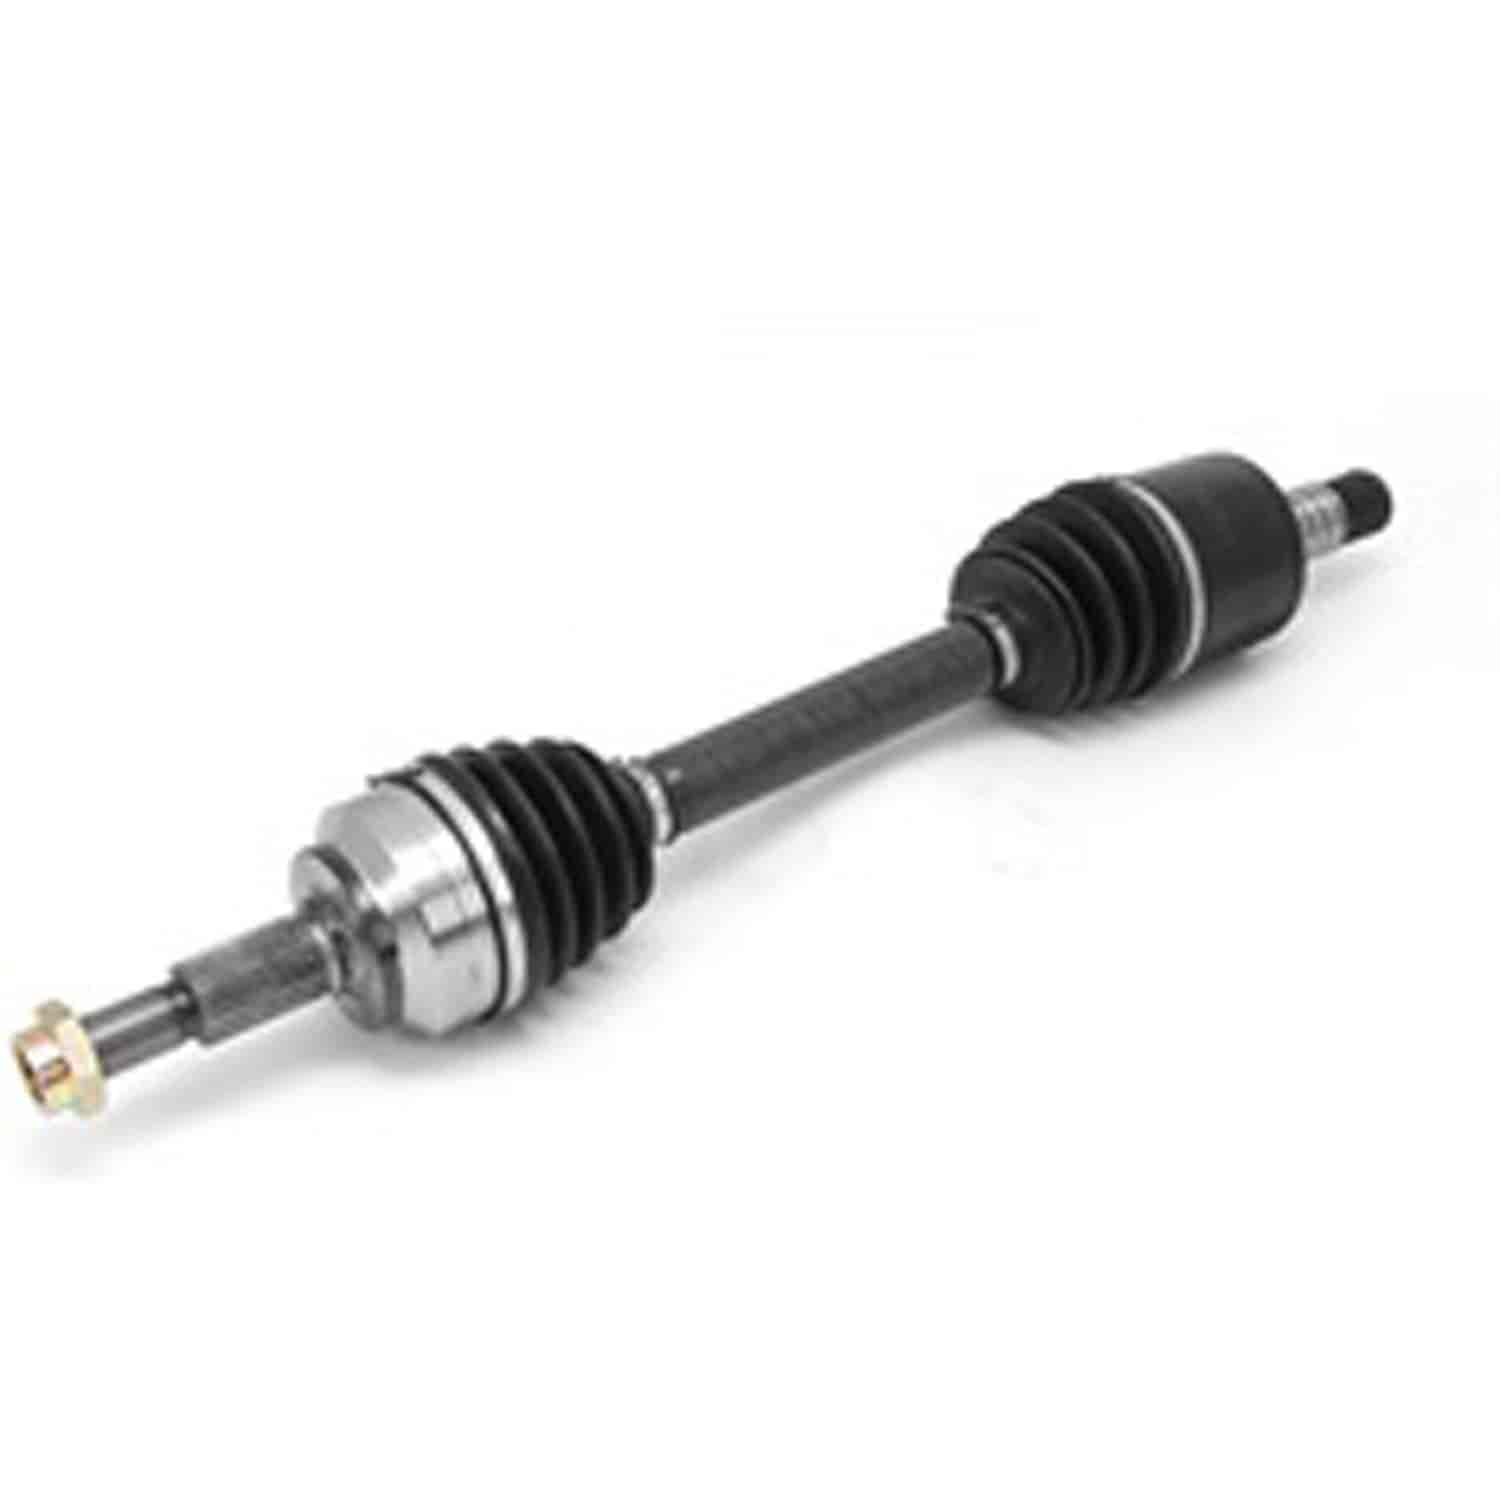 Replacement front CV axle shaft for Super d30